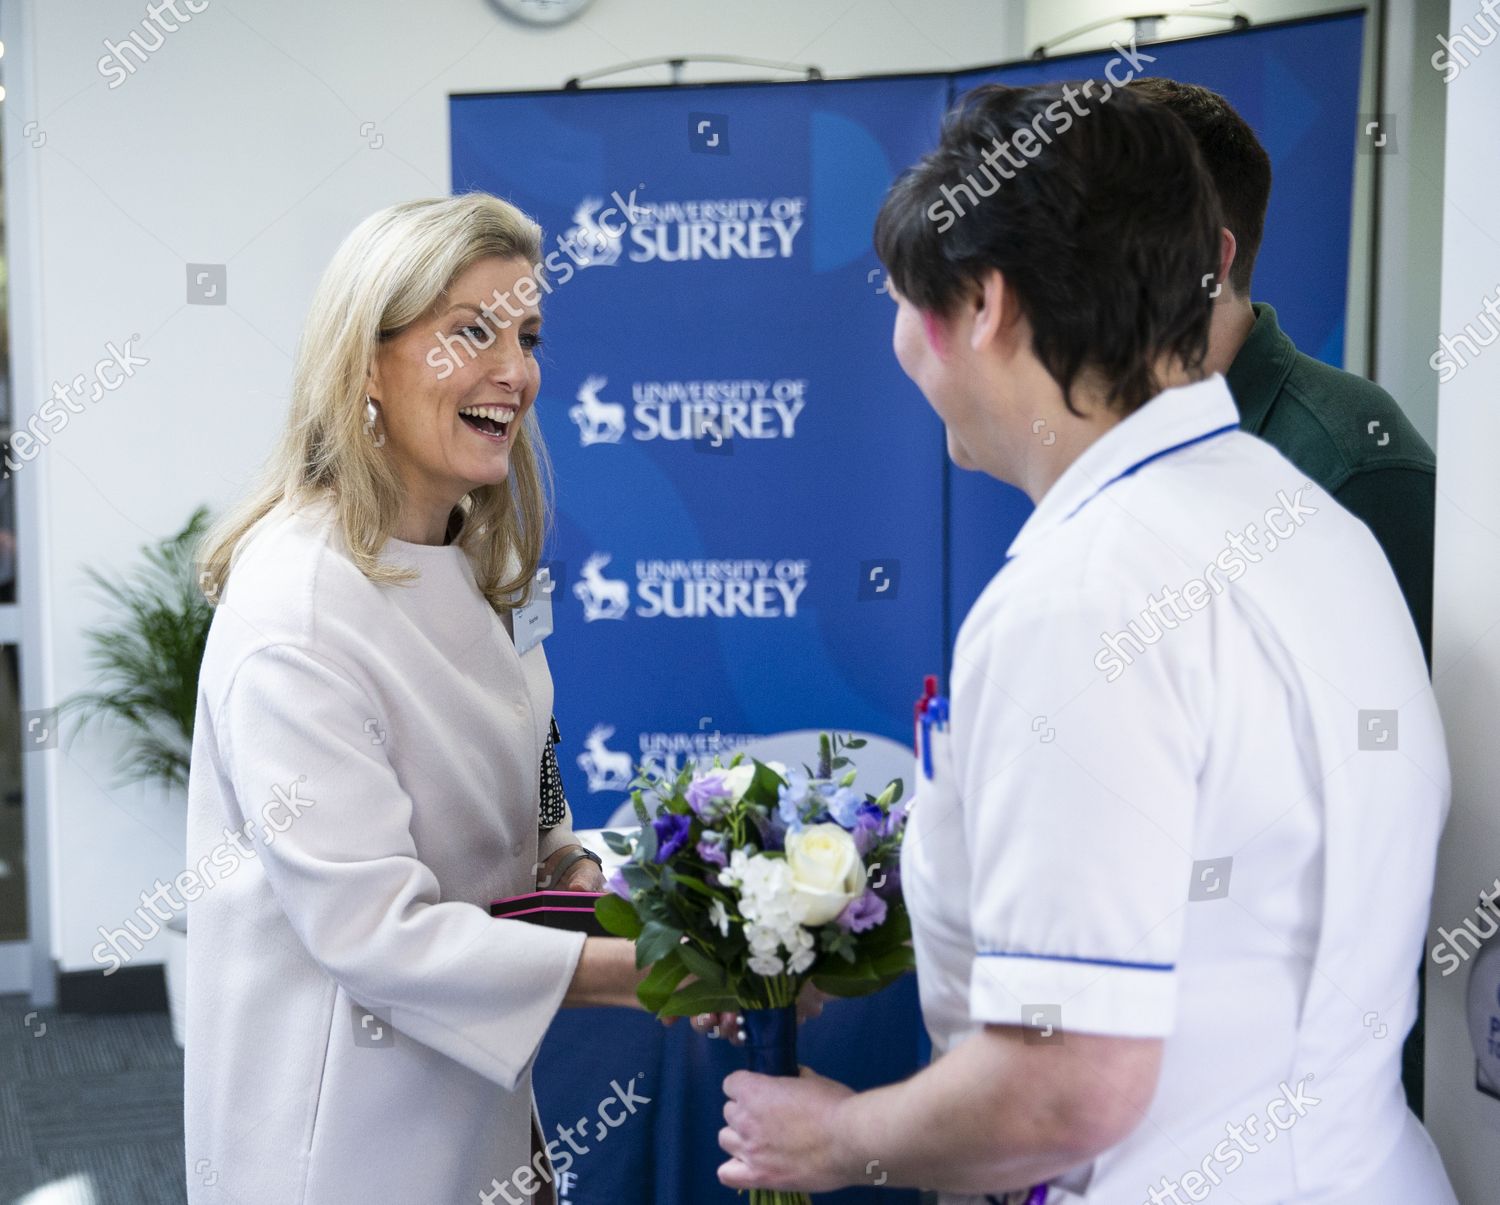 sophie-countess-of-wessex-opens-new-health-sciences-institute-university-of-surrey-guildford-uk-shutterstock-editorial-10542421af.jpg